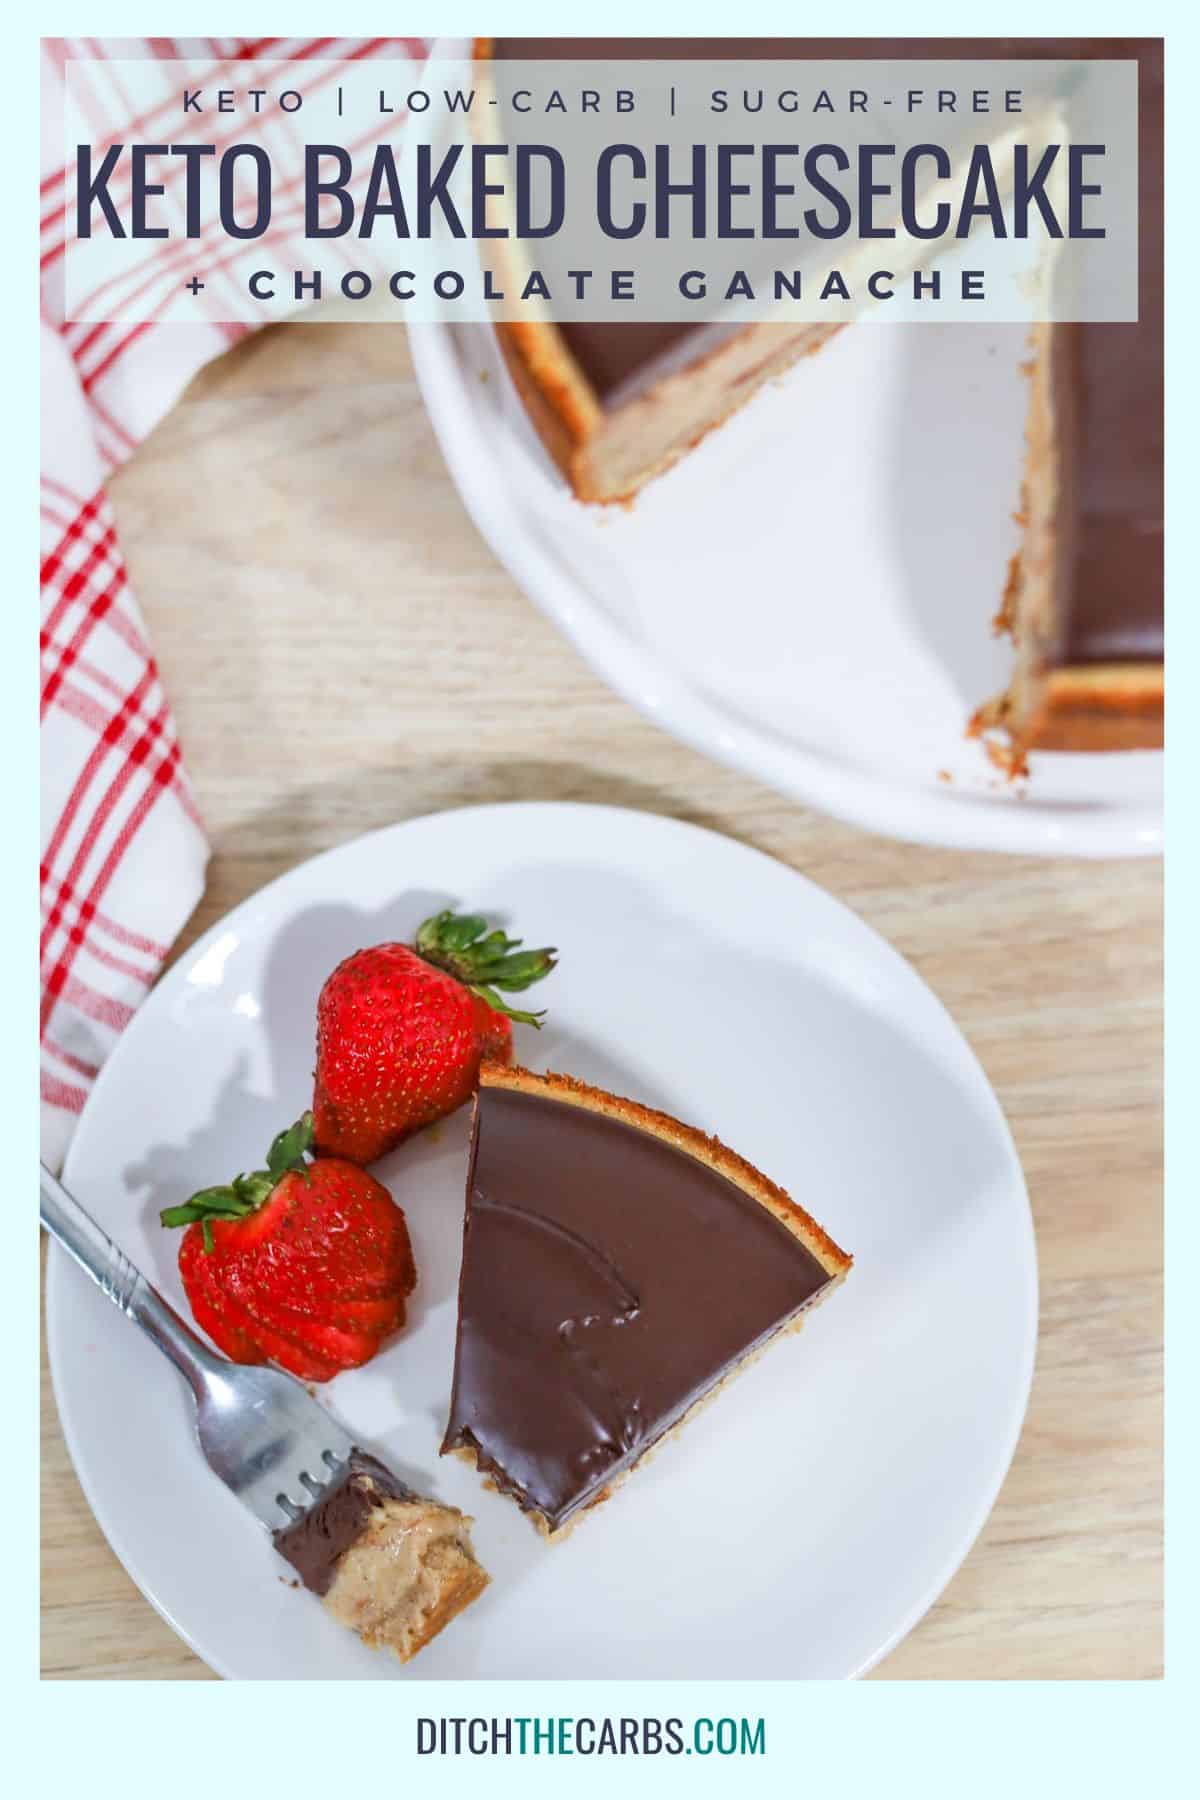 sliced keto cheesecake with chocolate ganache and served with strawberries